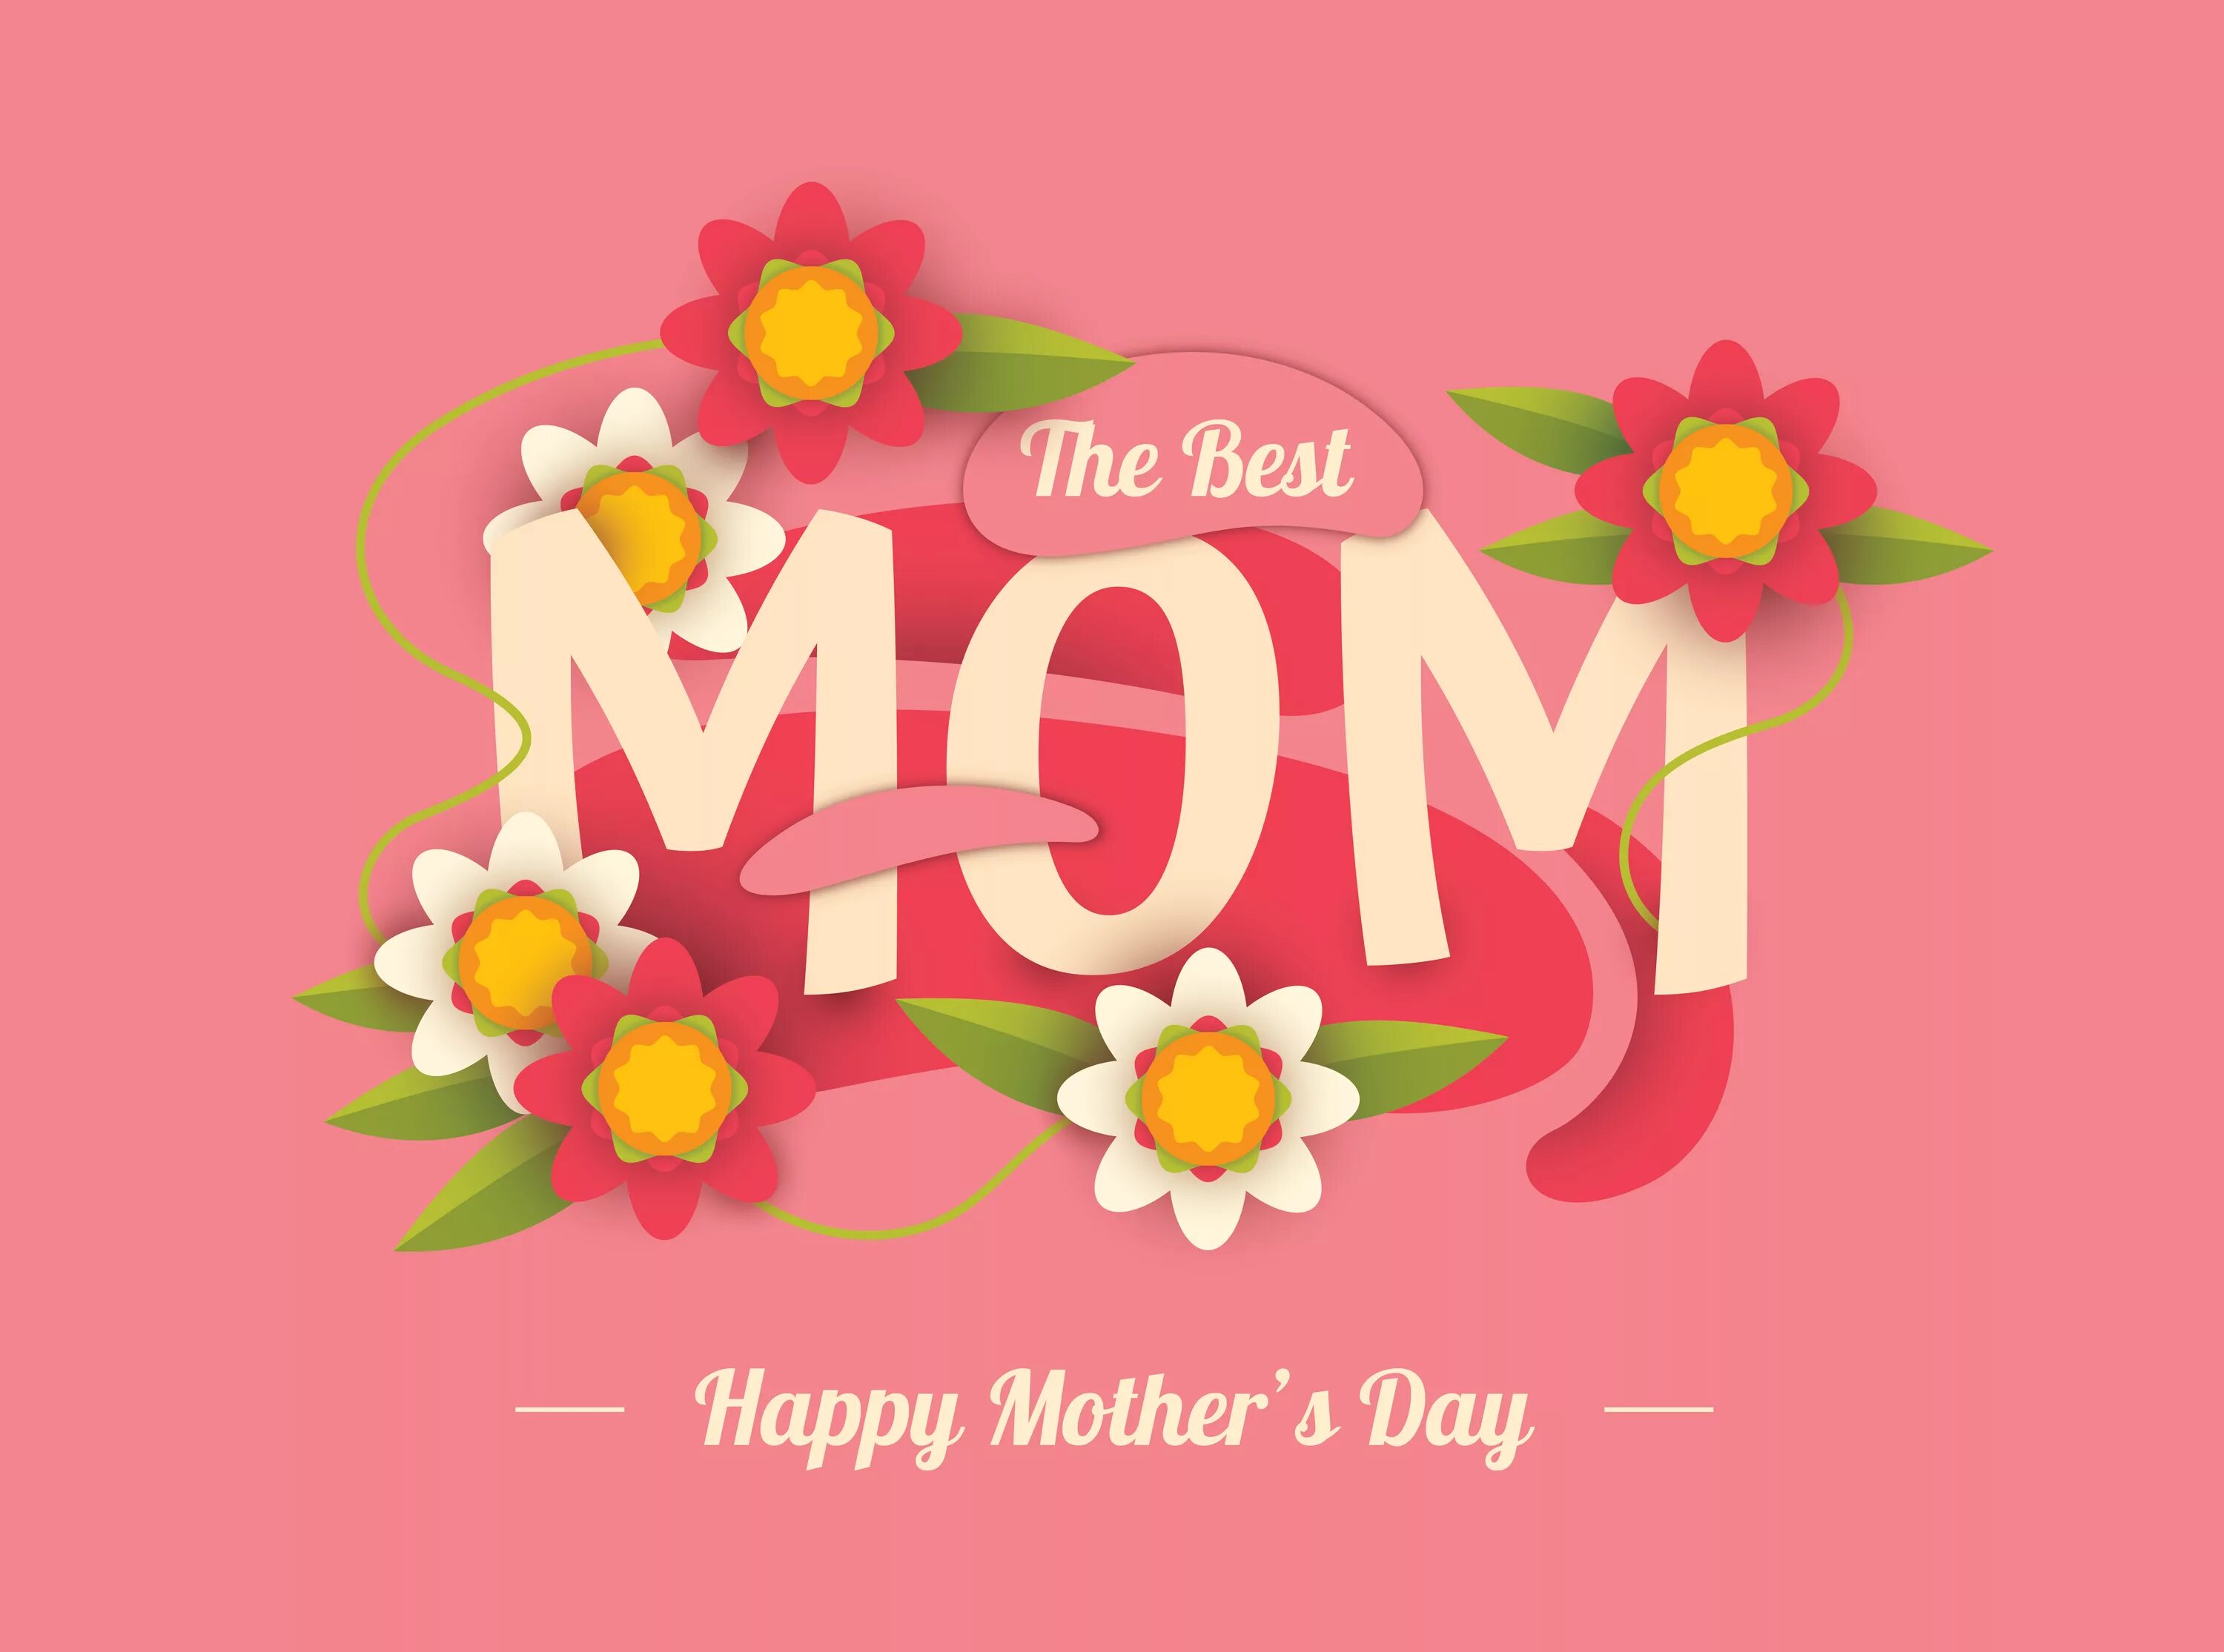 Немецкий день матери. Happy mother's Day. Happy mother's Day картинки. Congratulations for mothers Day. Фоновые картинки к mothers Day.